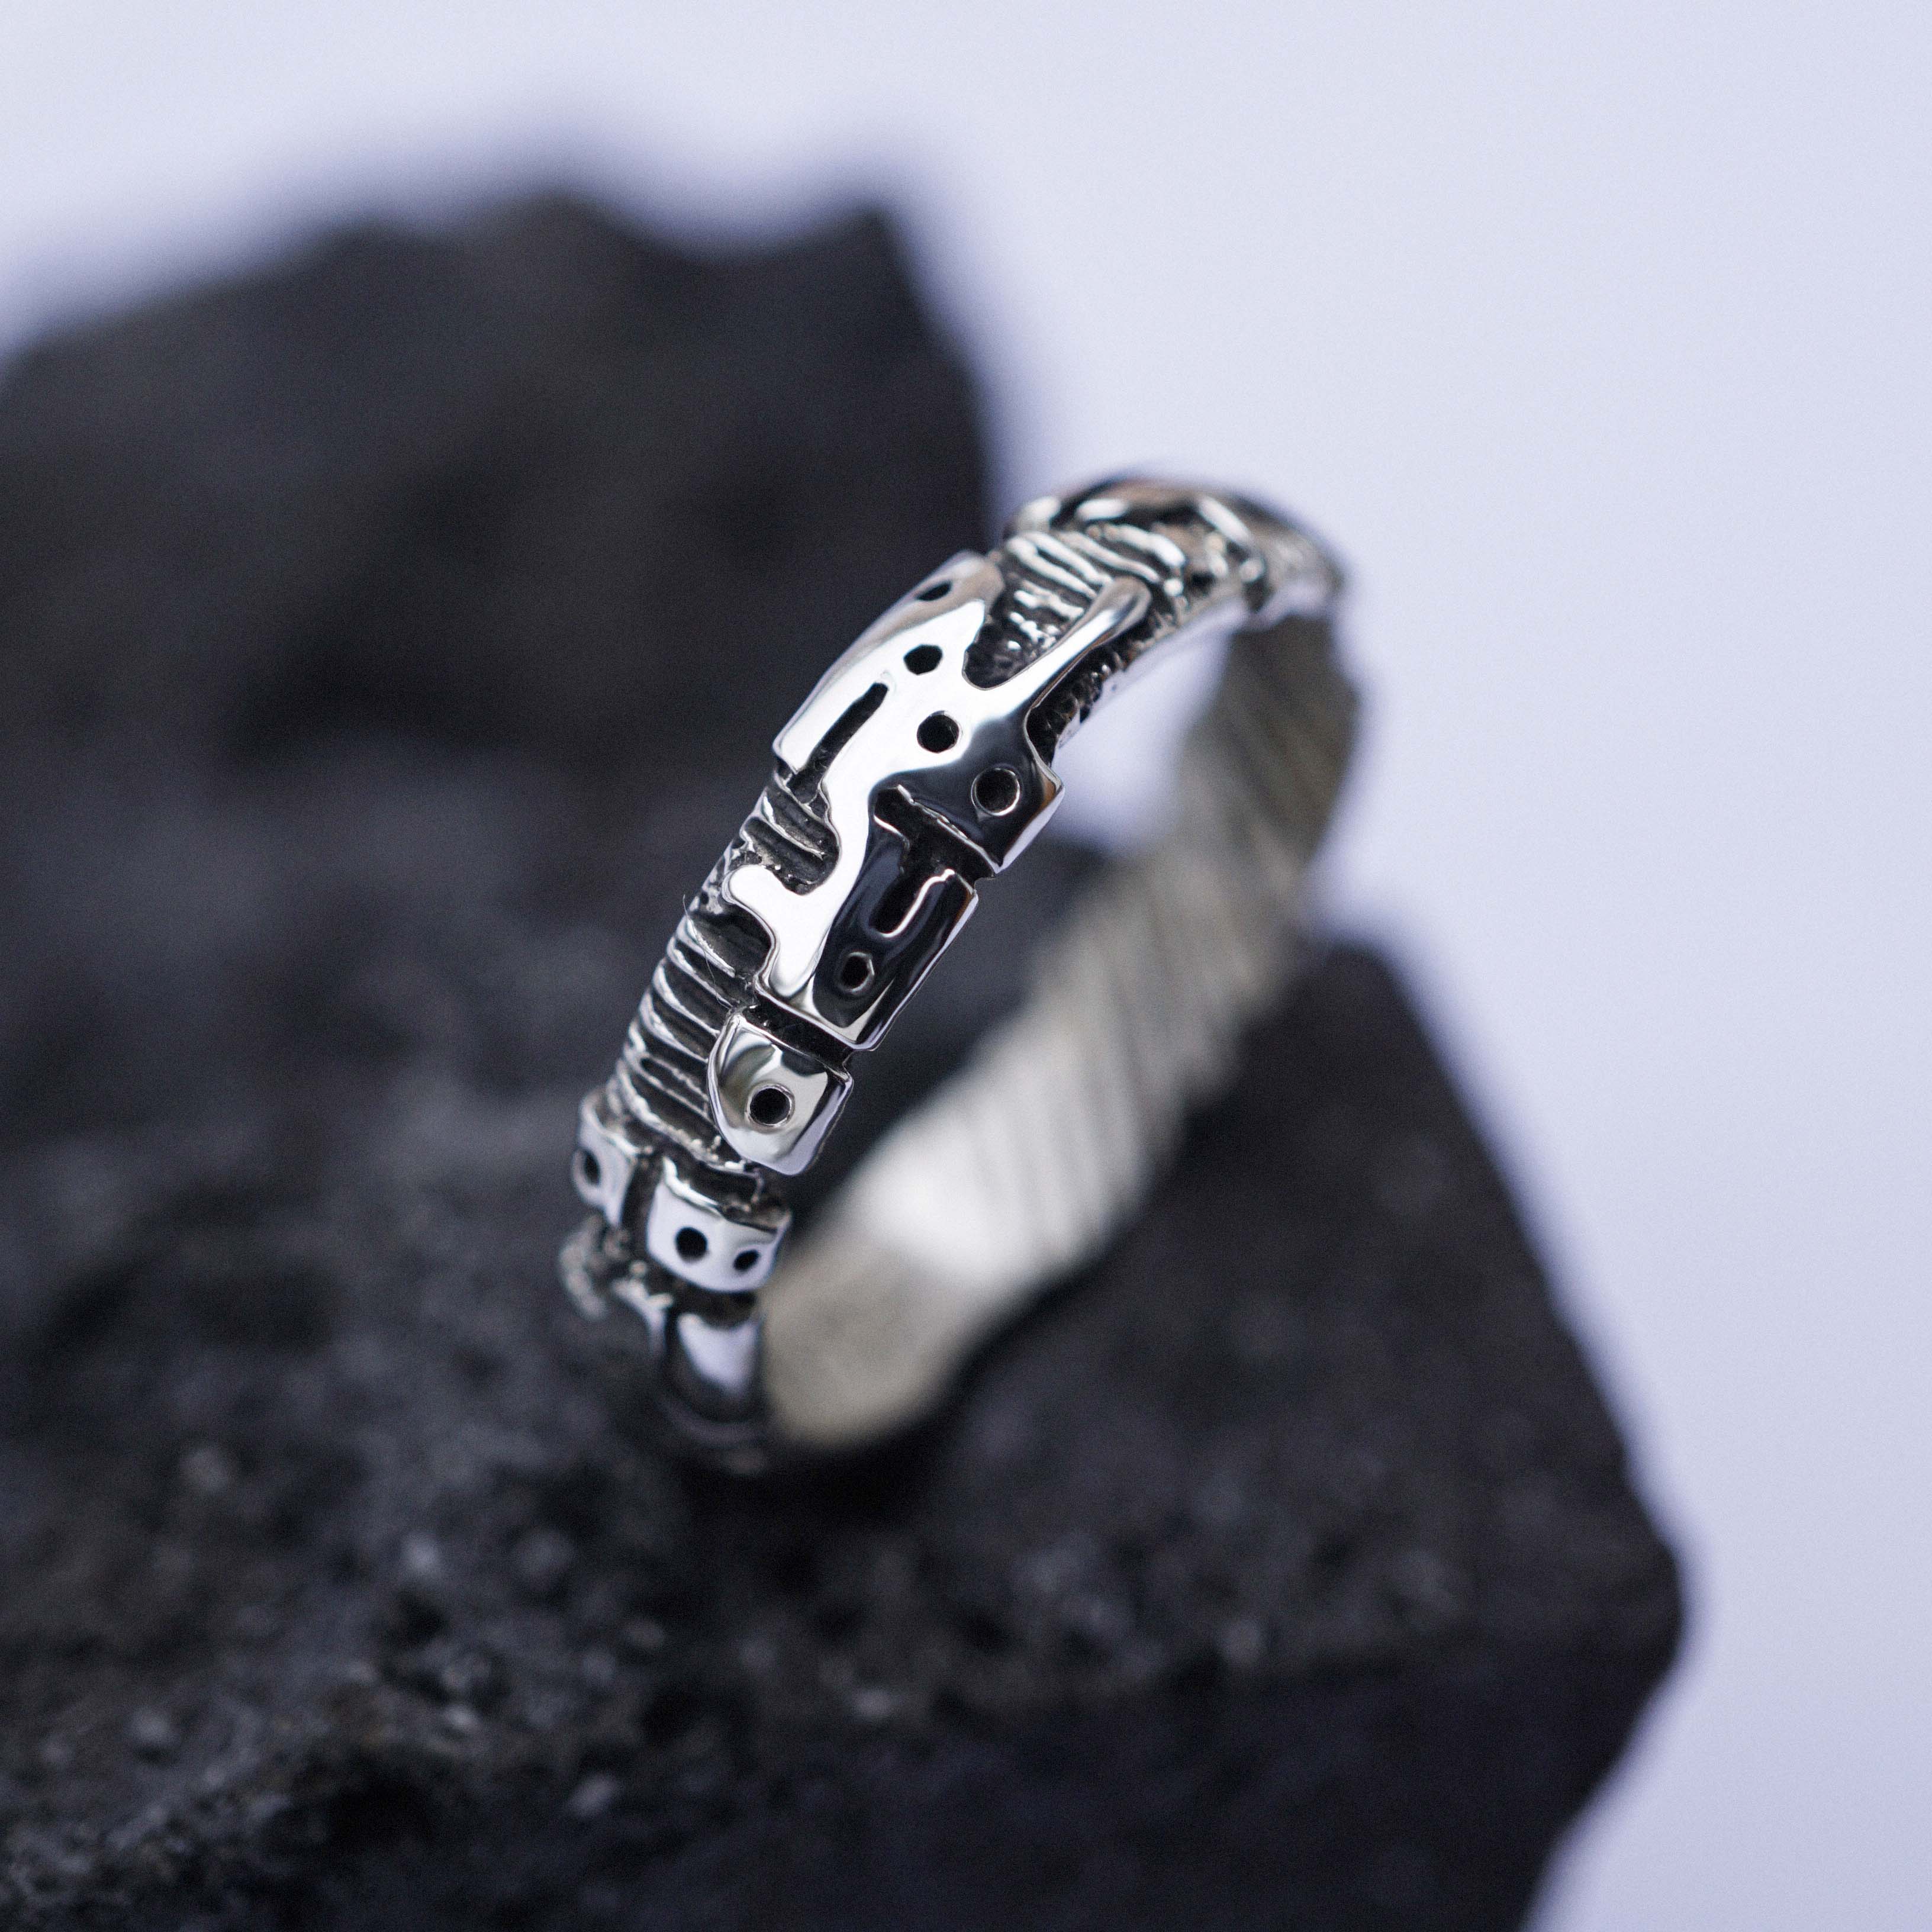 Mens silver band from the sterling silver and handcrafted cyberpunk design 